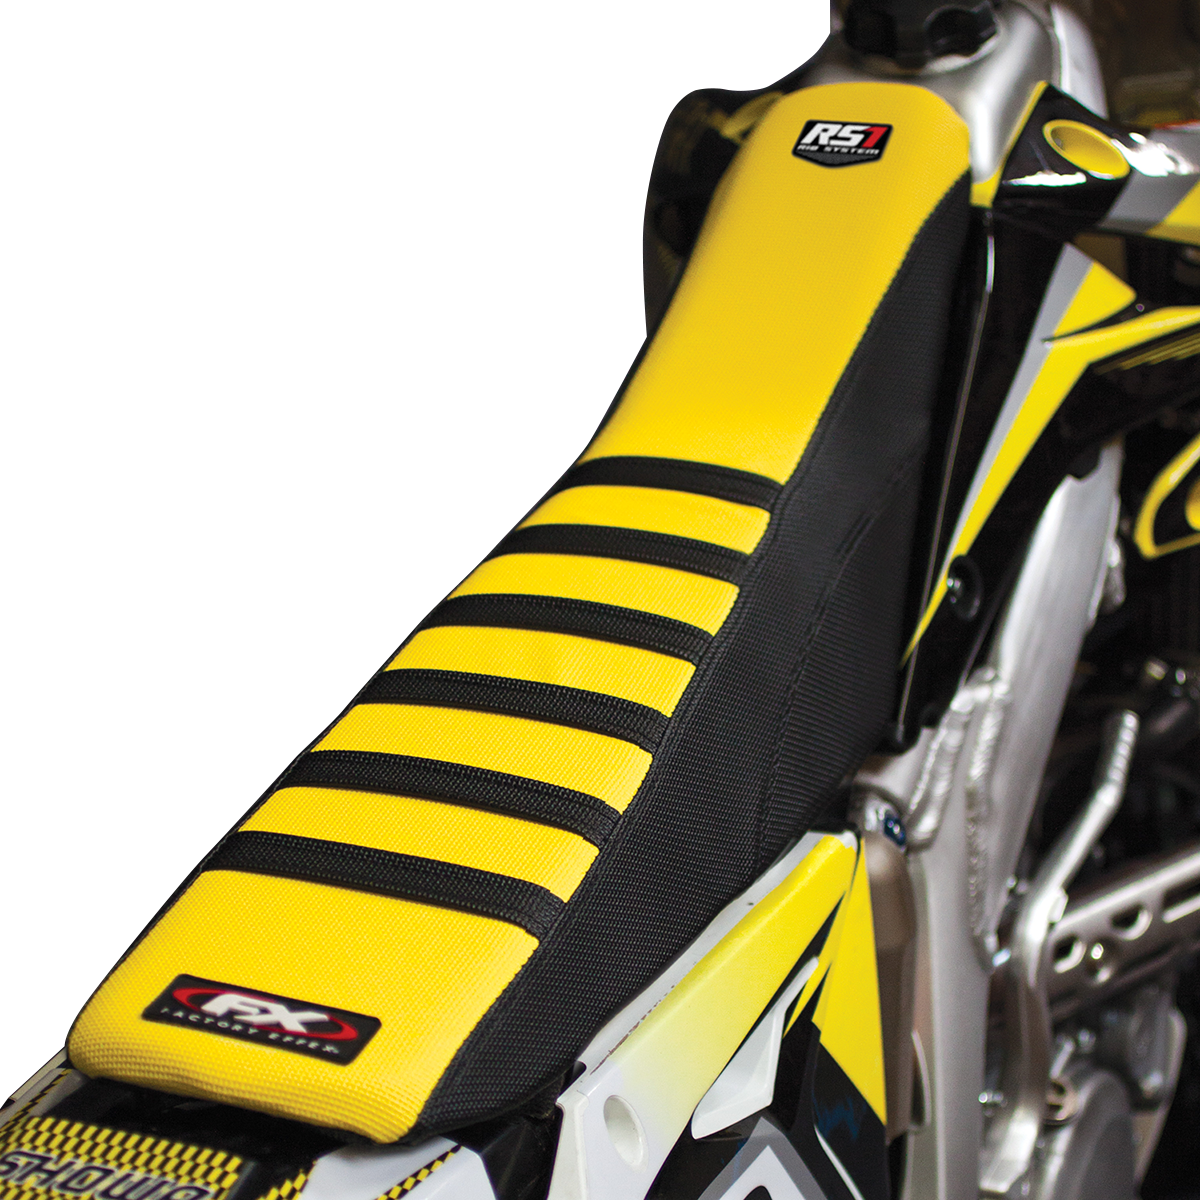 FACTORY EFFEX RS1 Seat Cover - KX 250/450F 18-29126